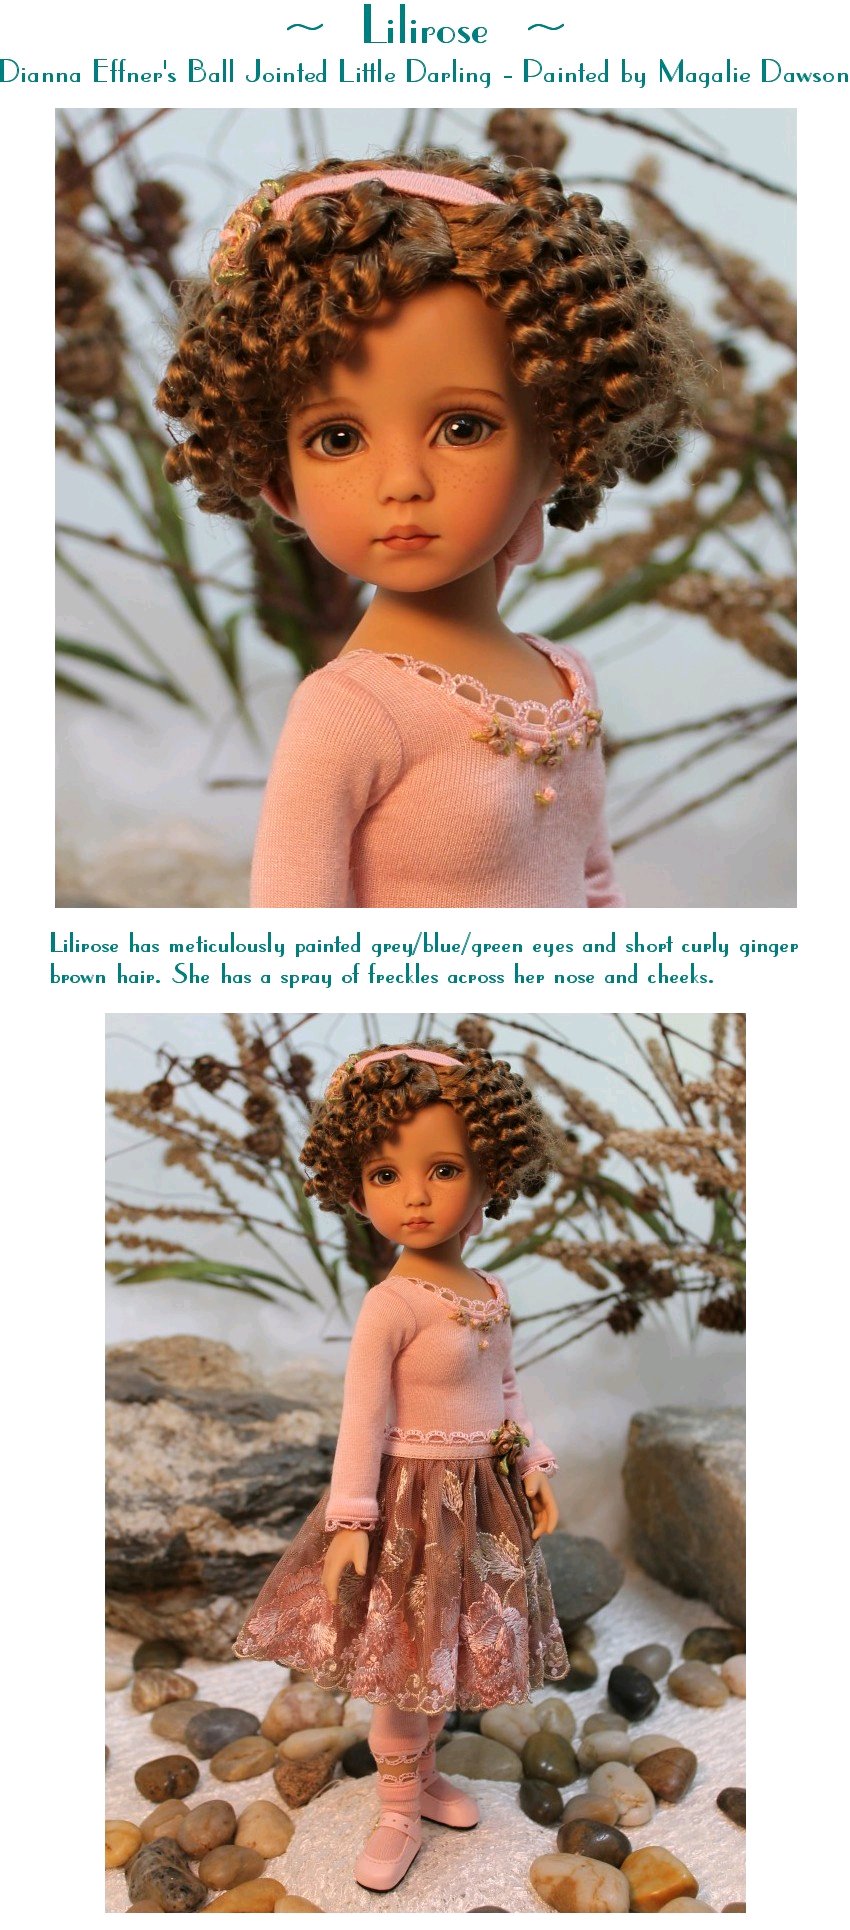 Lilirose - a Ball Jointed Little Darling